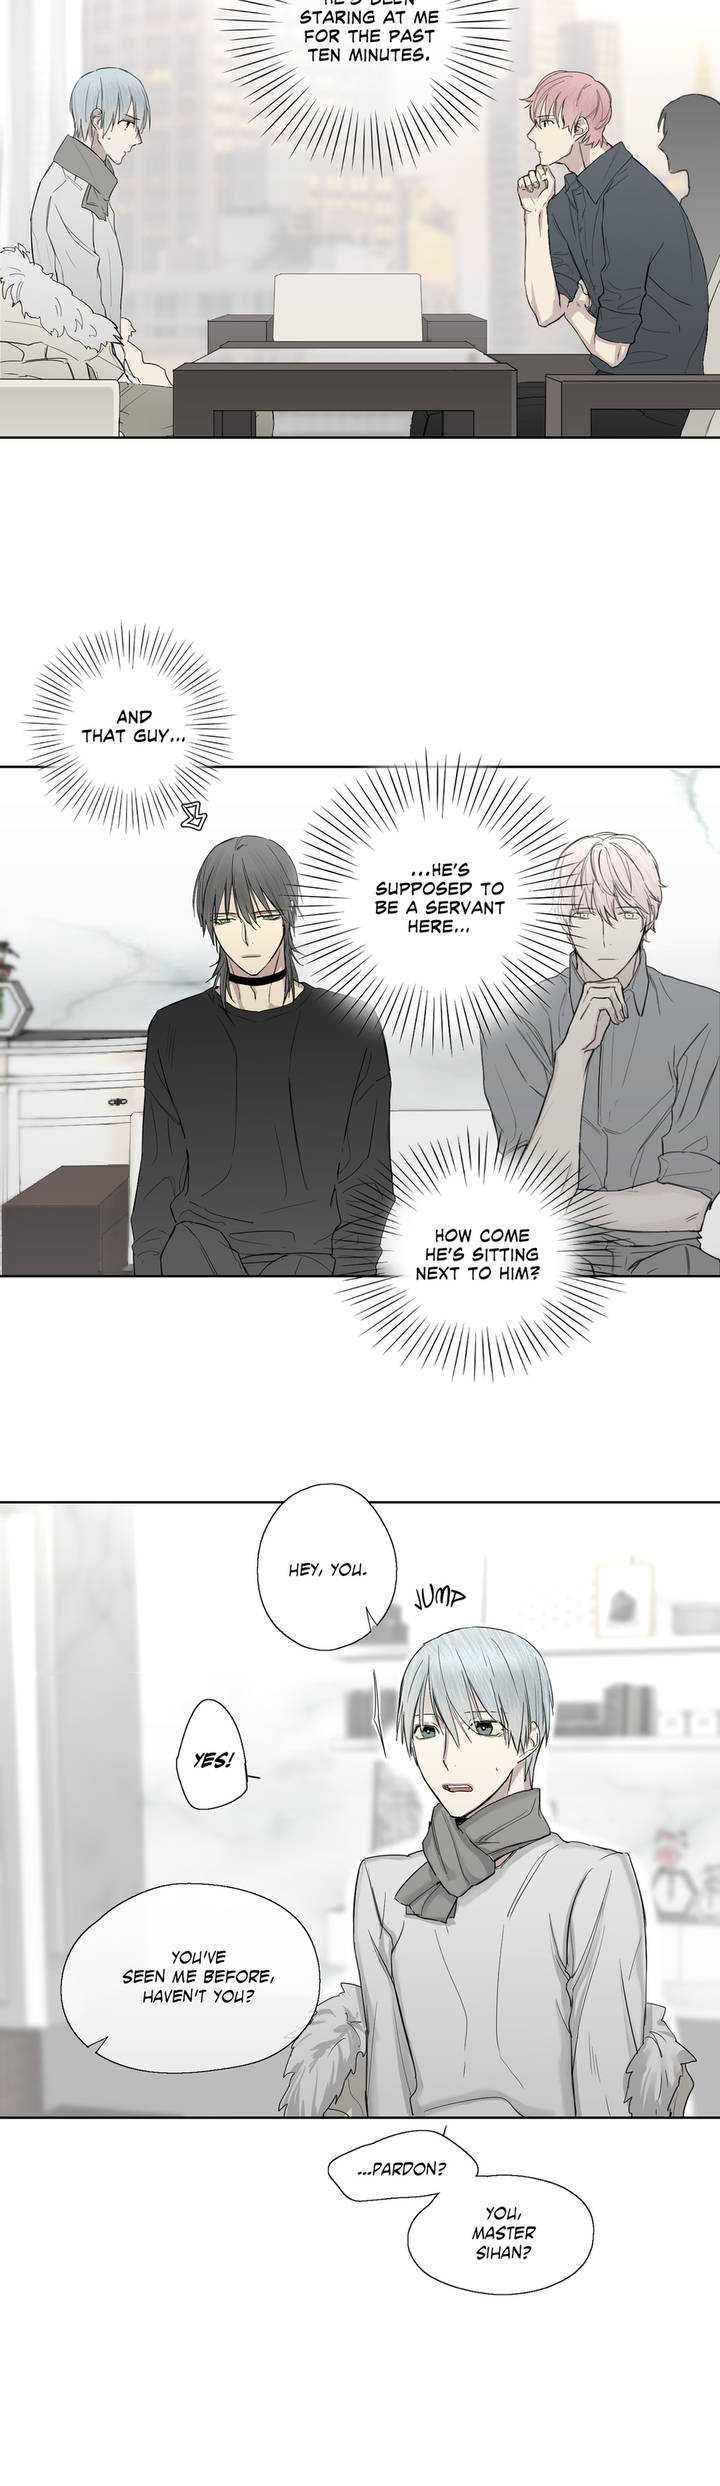 Royal Servant - Chapter 4 Page 21